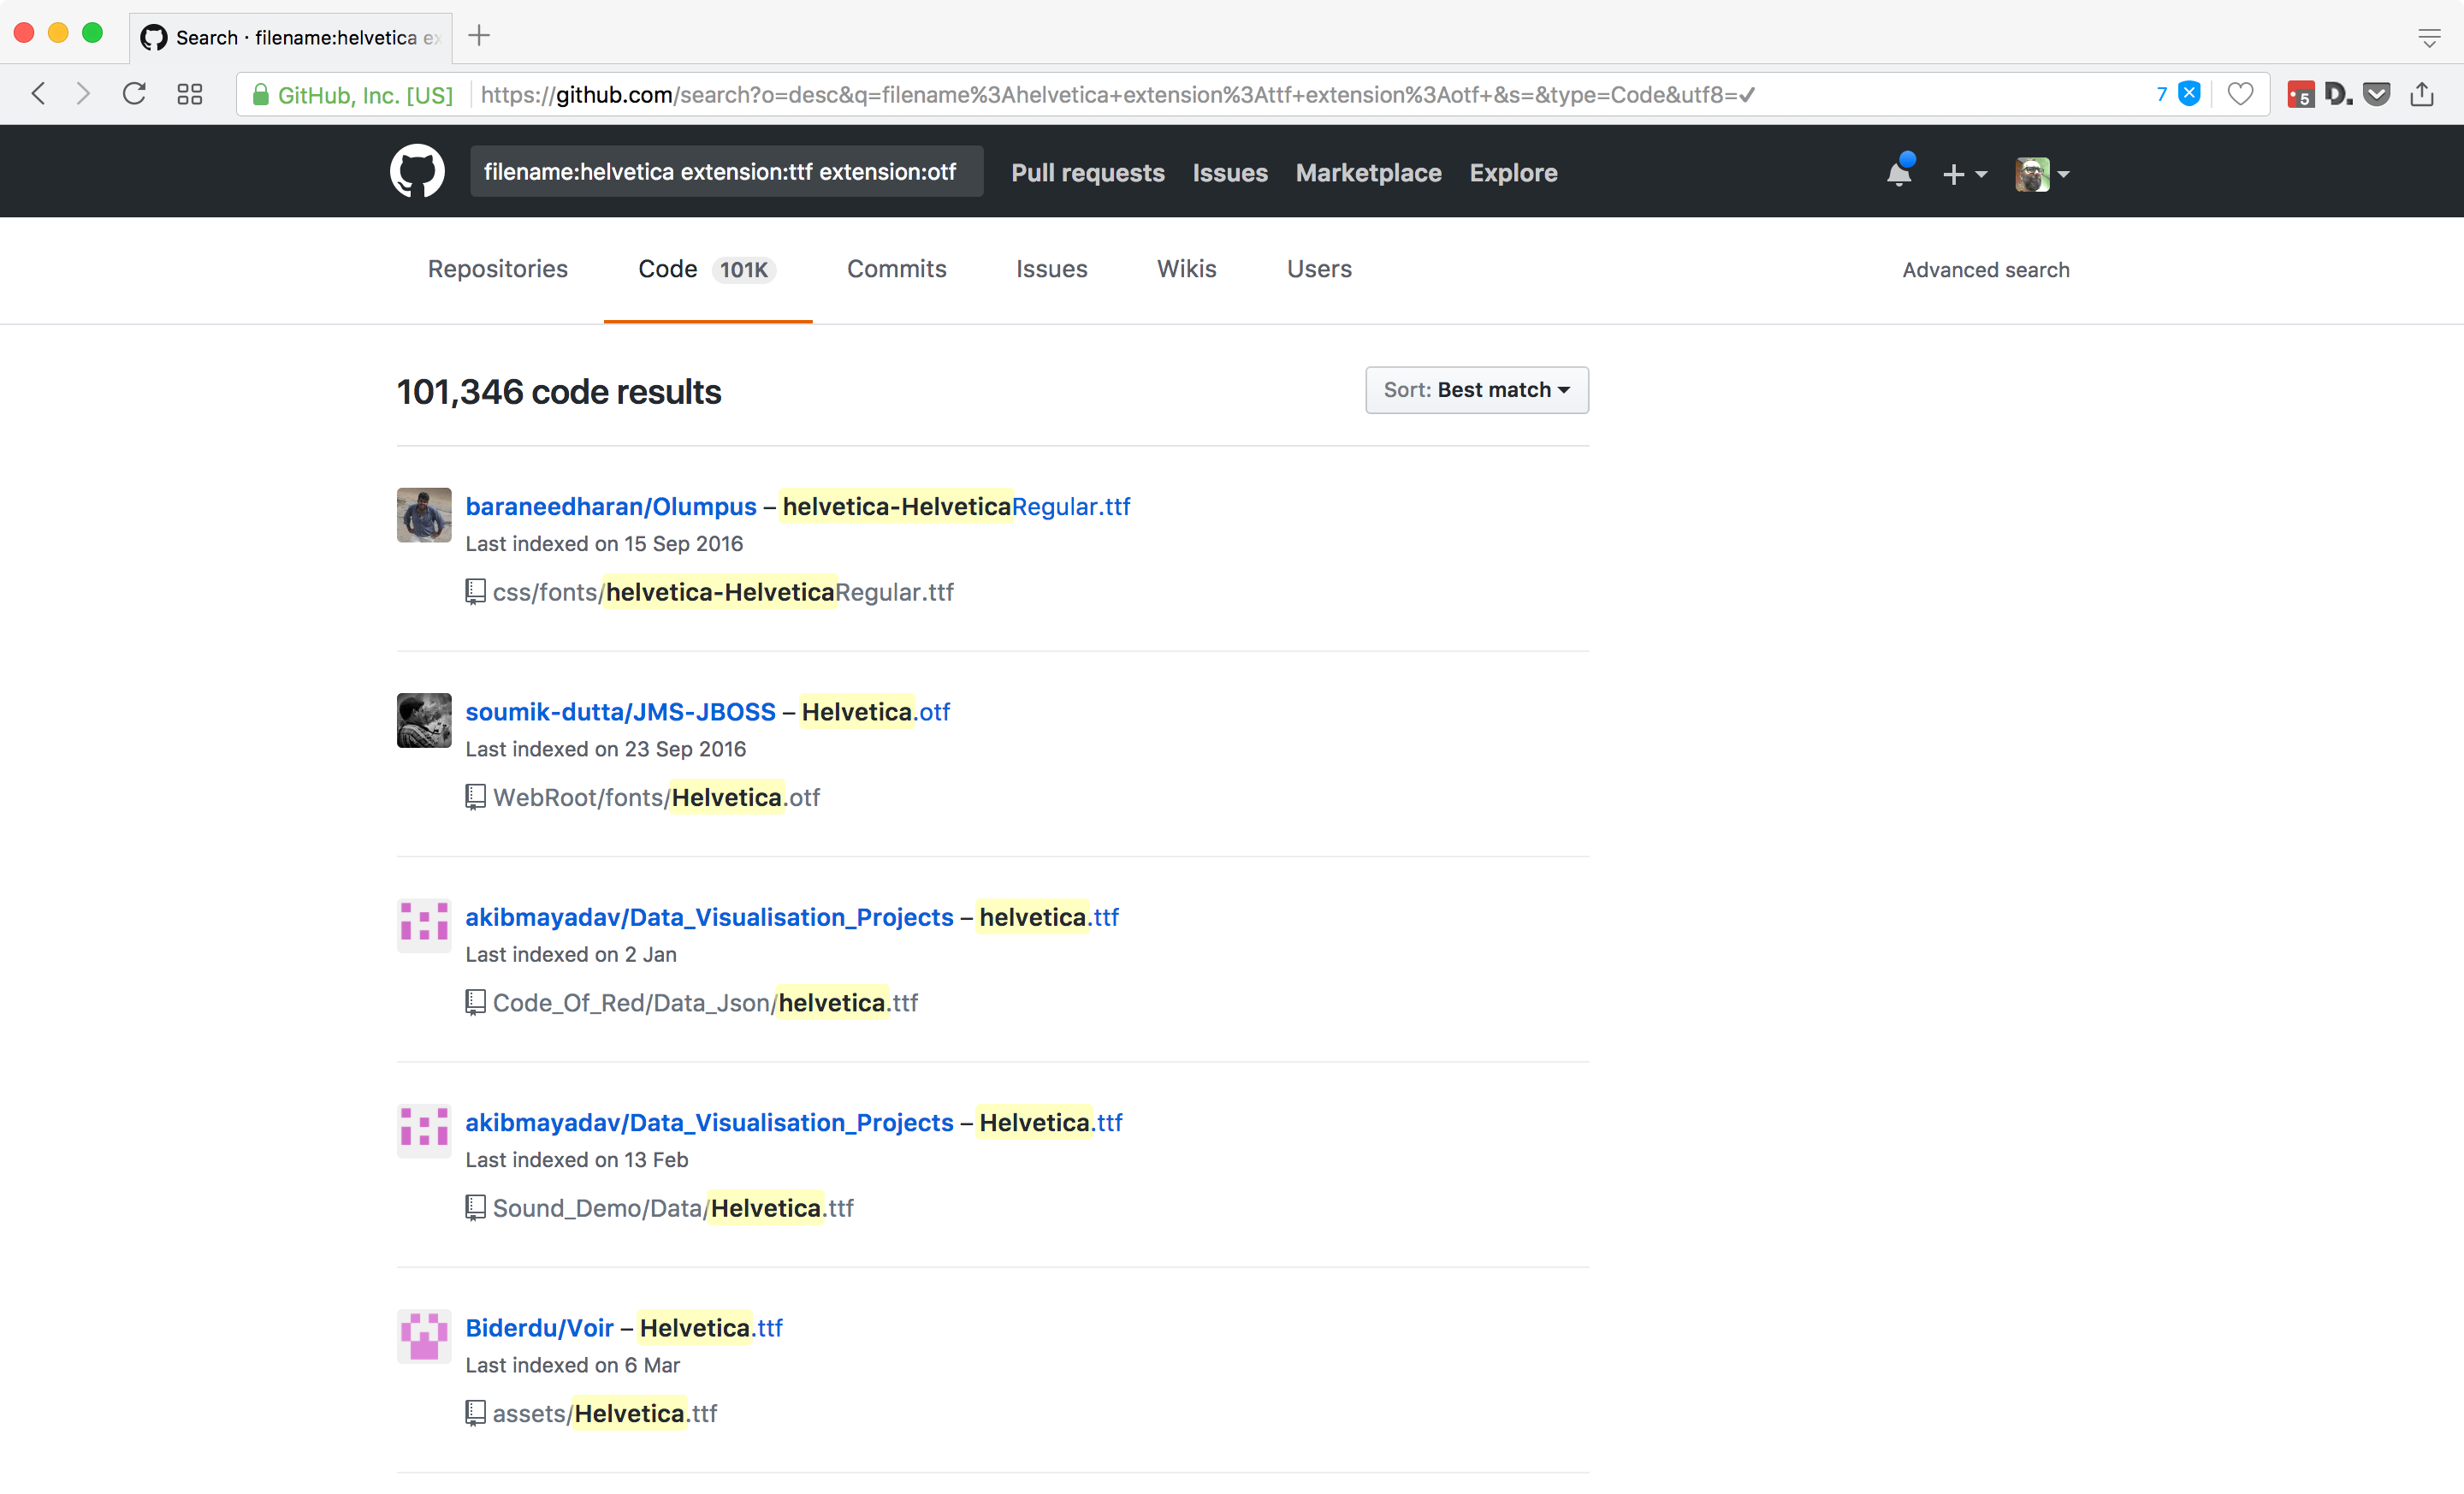 Search results for Helvetica on Github